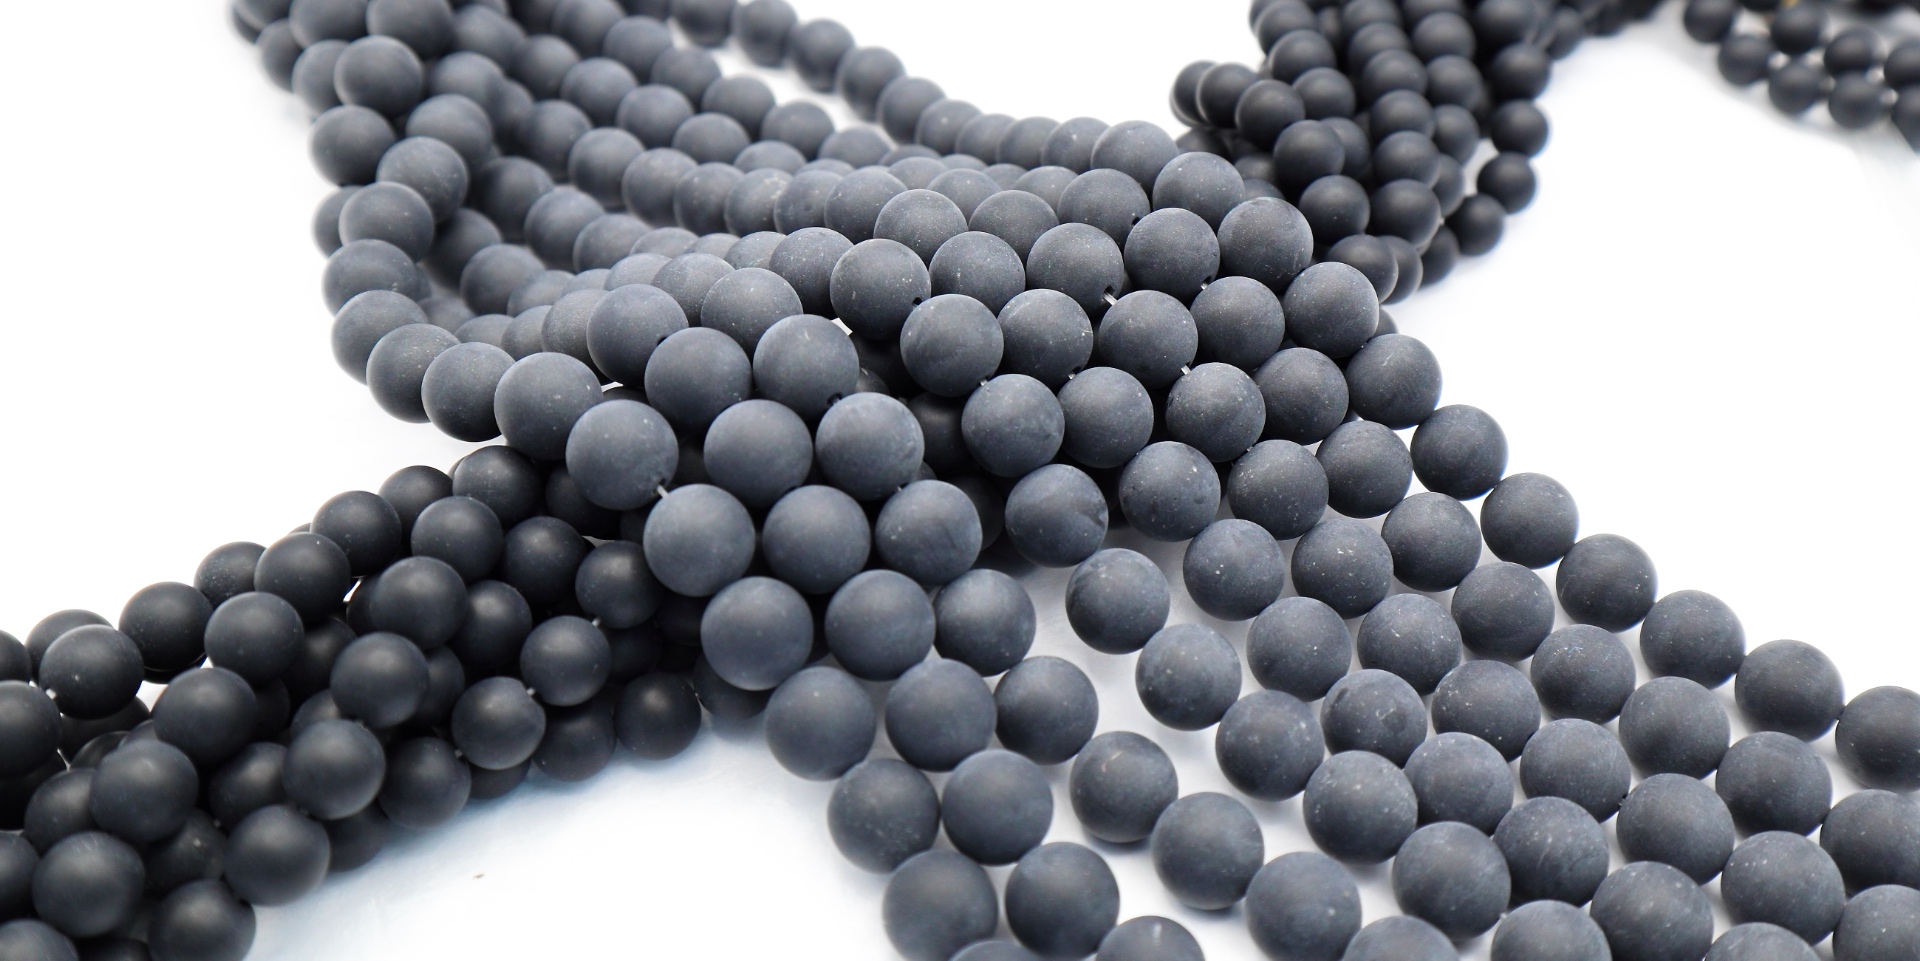 Black Agate Frosted (Matt Finish) Round Beads 6 mm